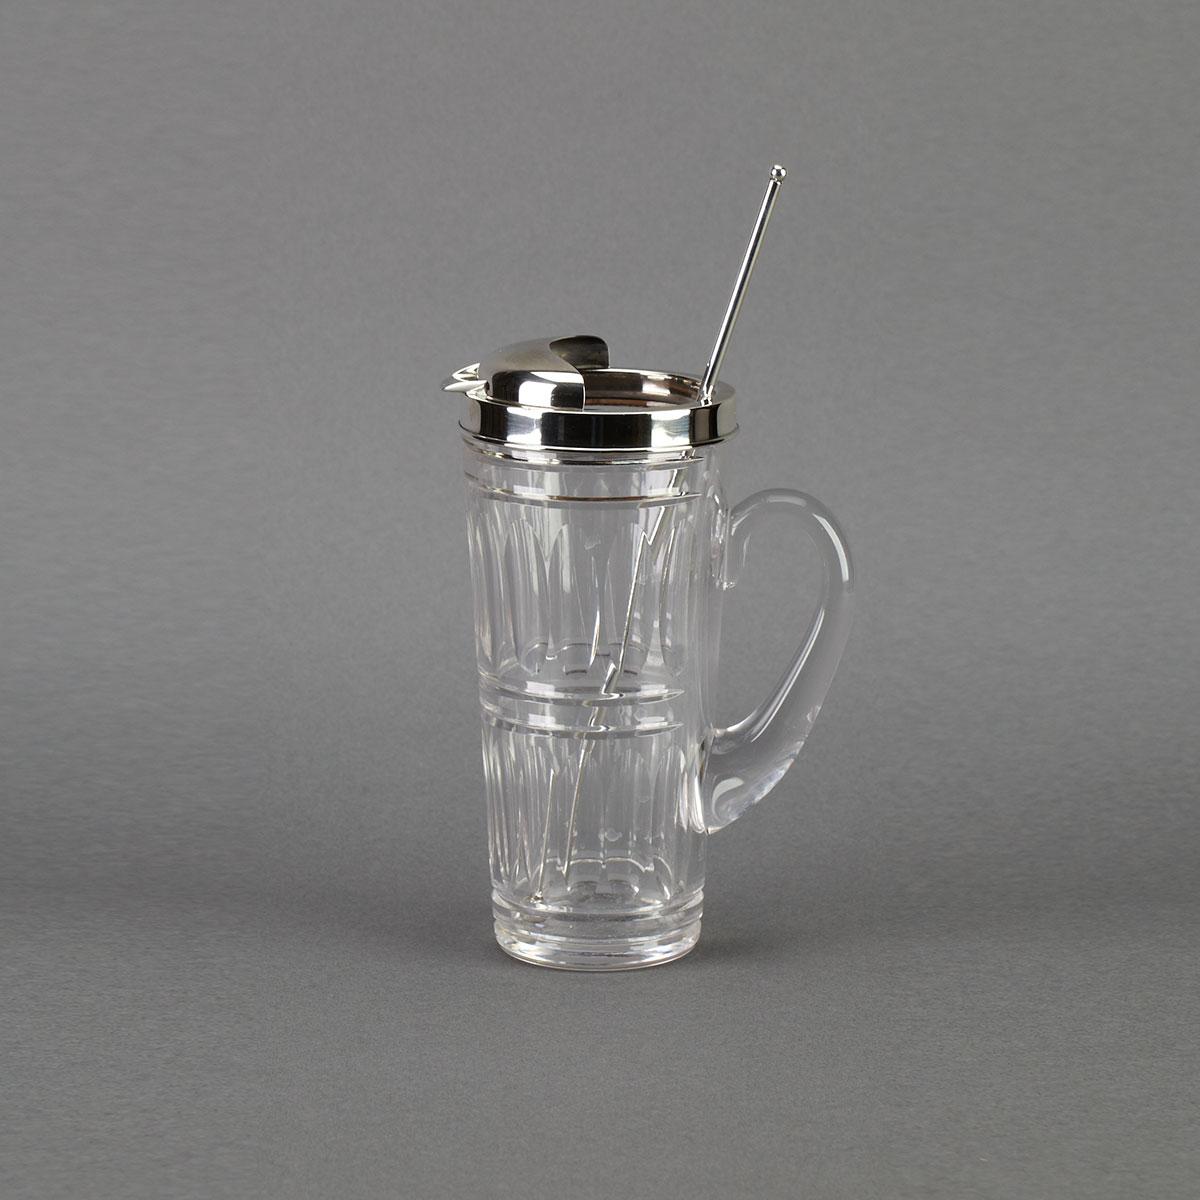 American Silver Mounted Hawkes Cut Glass Cocktail Pitcher with Muddler, Tiffany & Co., New York, N.Y., 20th century